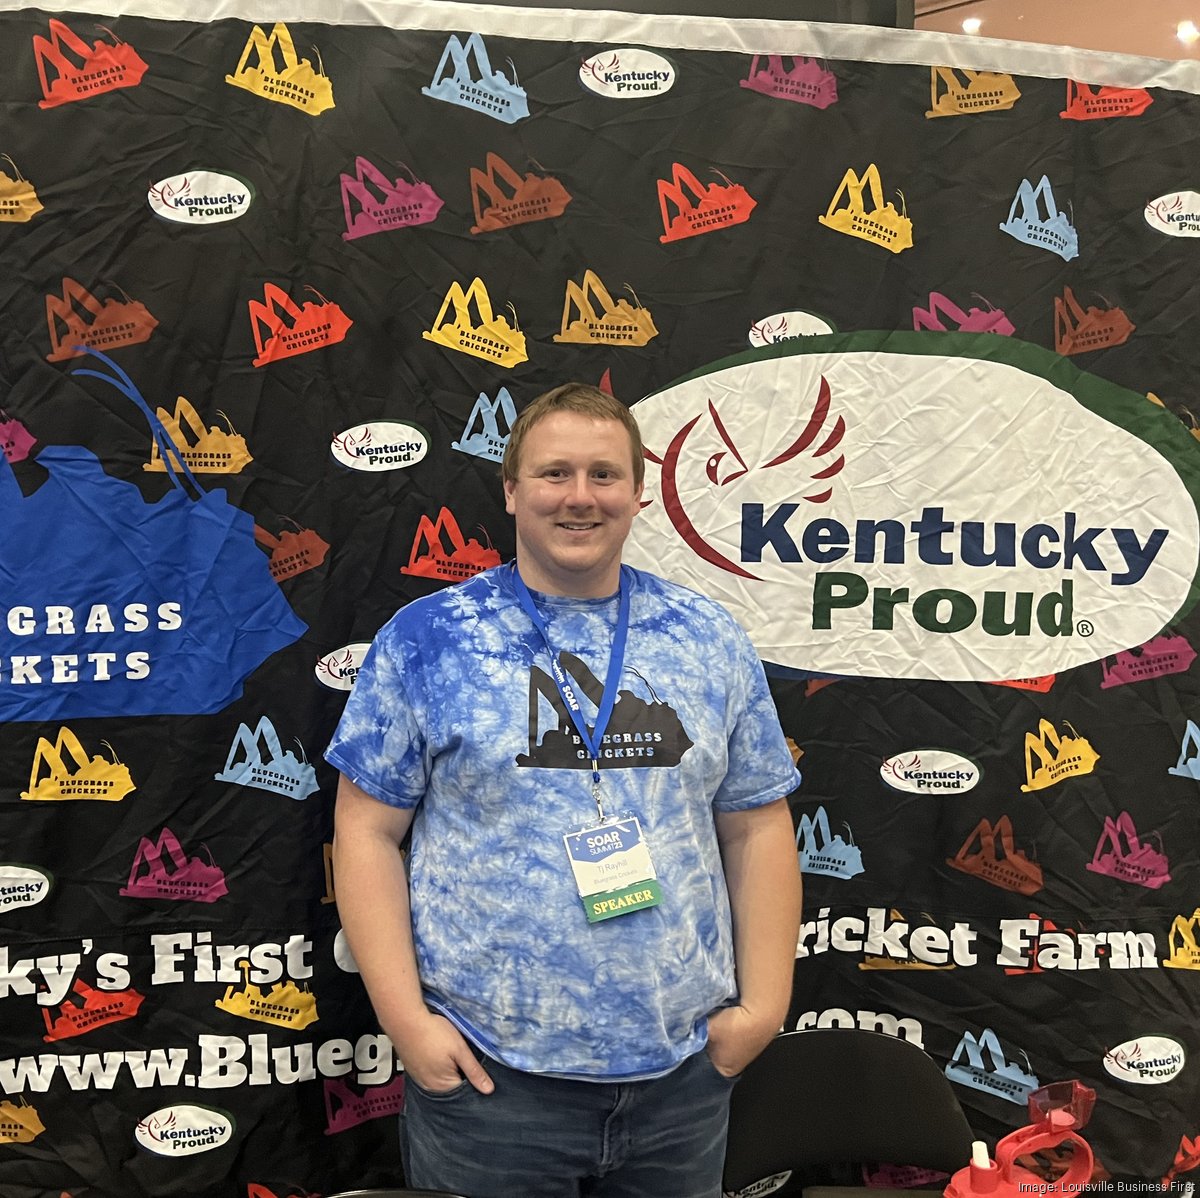 KY Inno - Small but scrumptious? Eastern Kentucky startup looks to